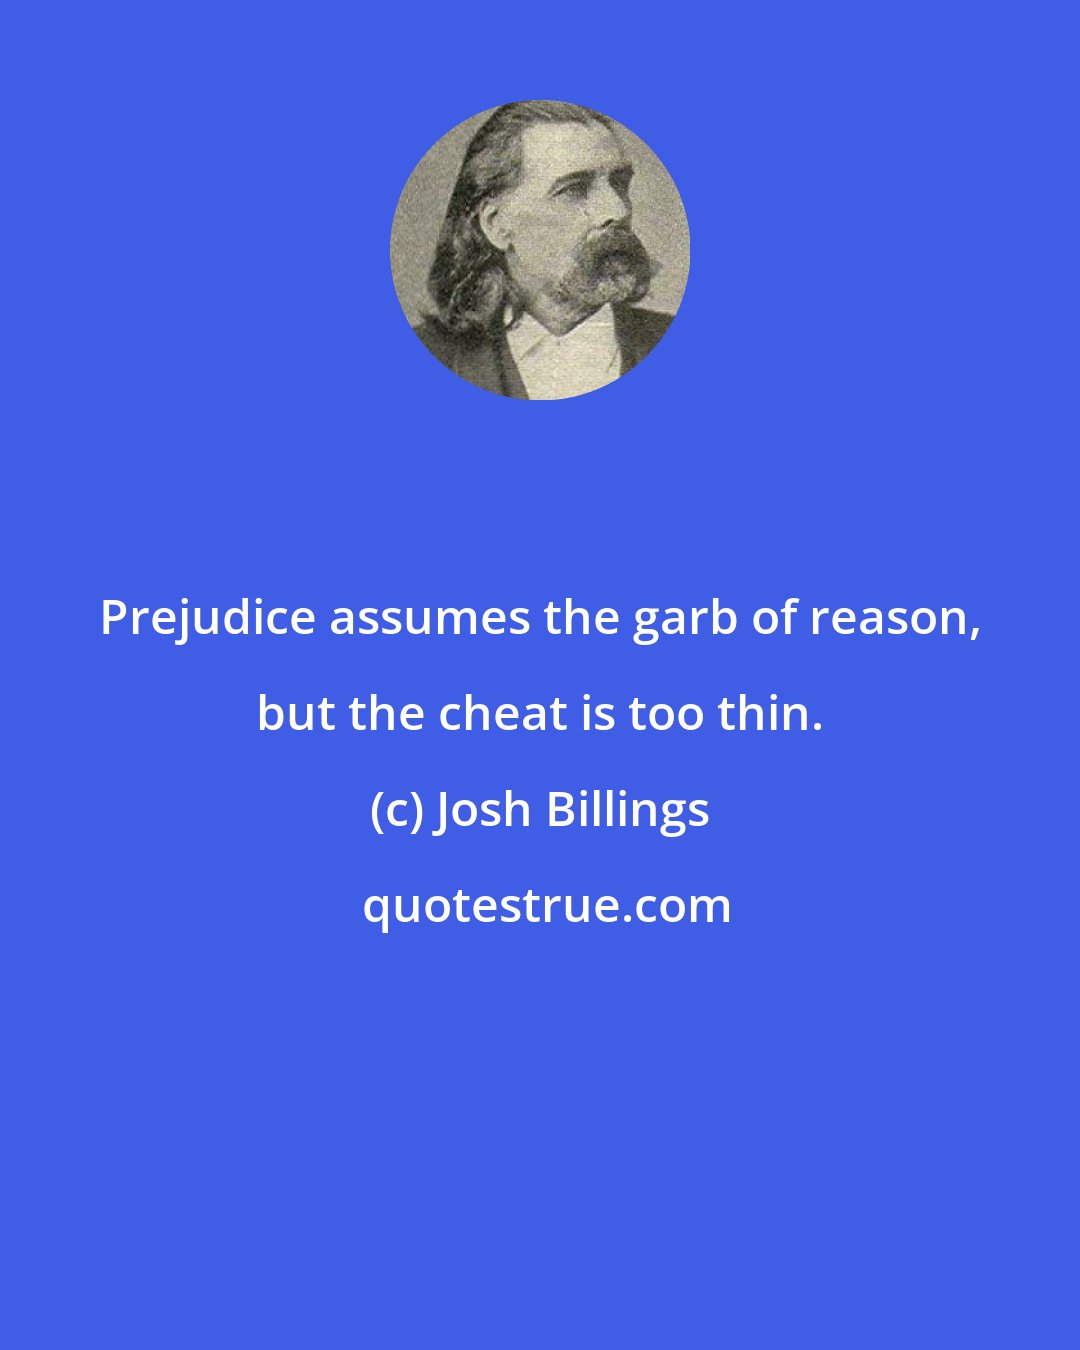 Josh Billings: Prejudice assumes the garb of reason, but the cheat is too thin.